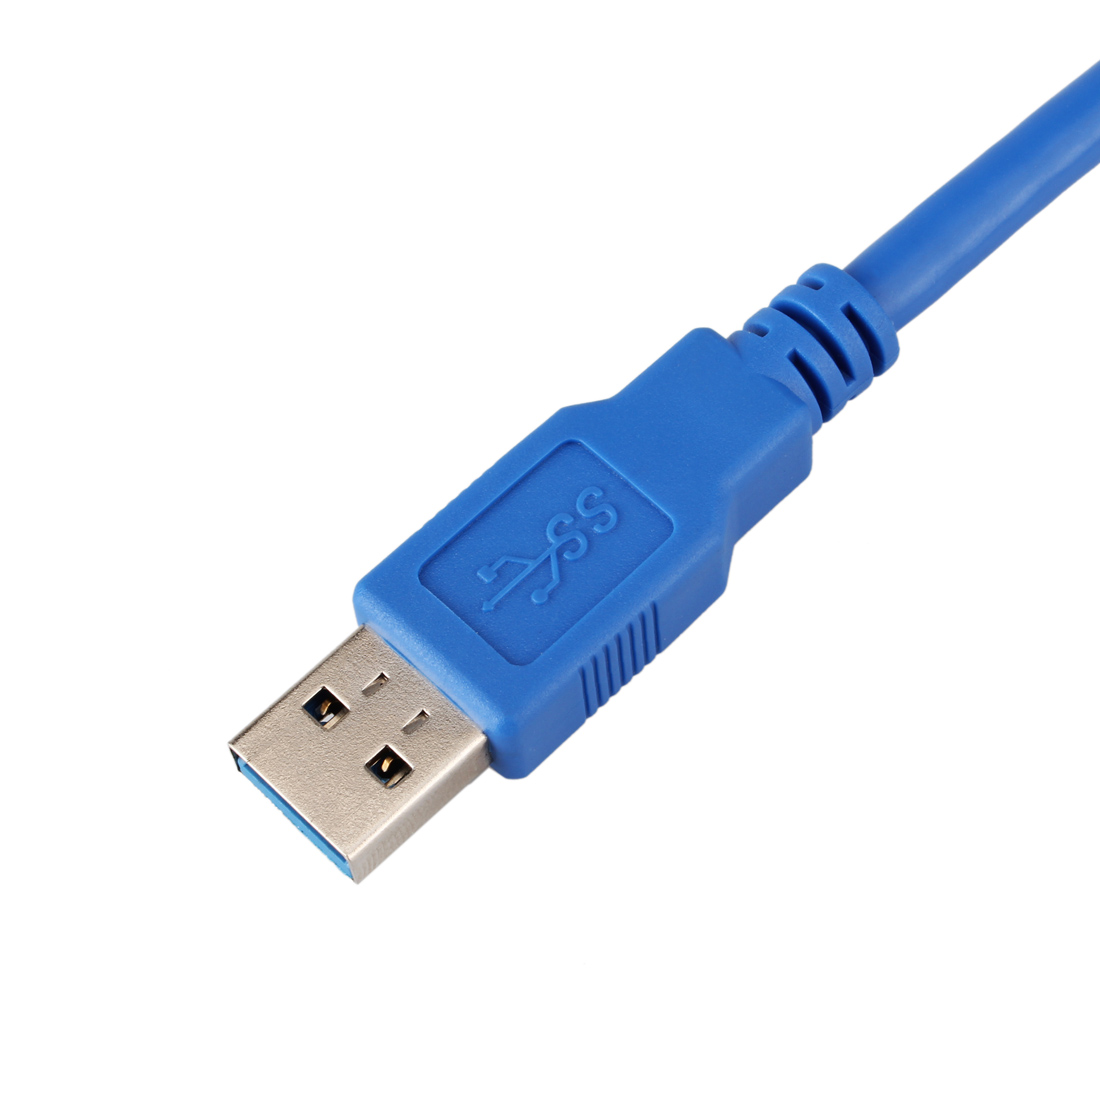 1m-USB-30-Type-A-Male-to-Type-A-Male-USB-Extension-Cable-for-Data-927650